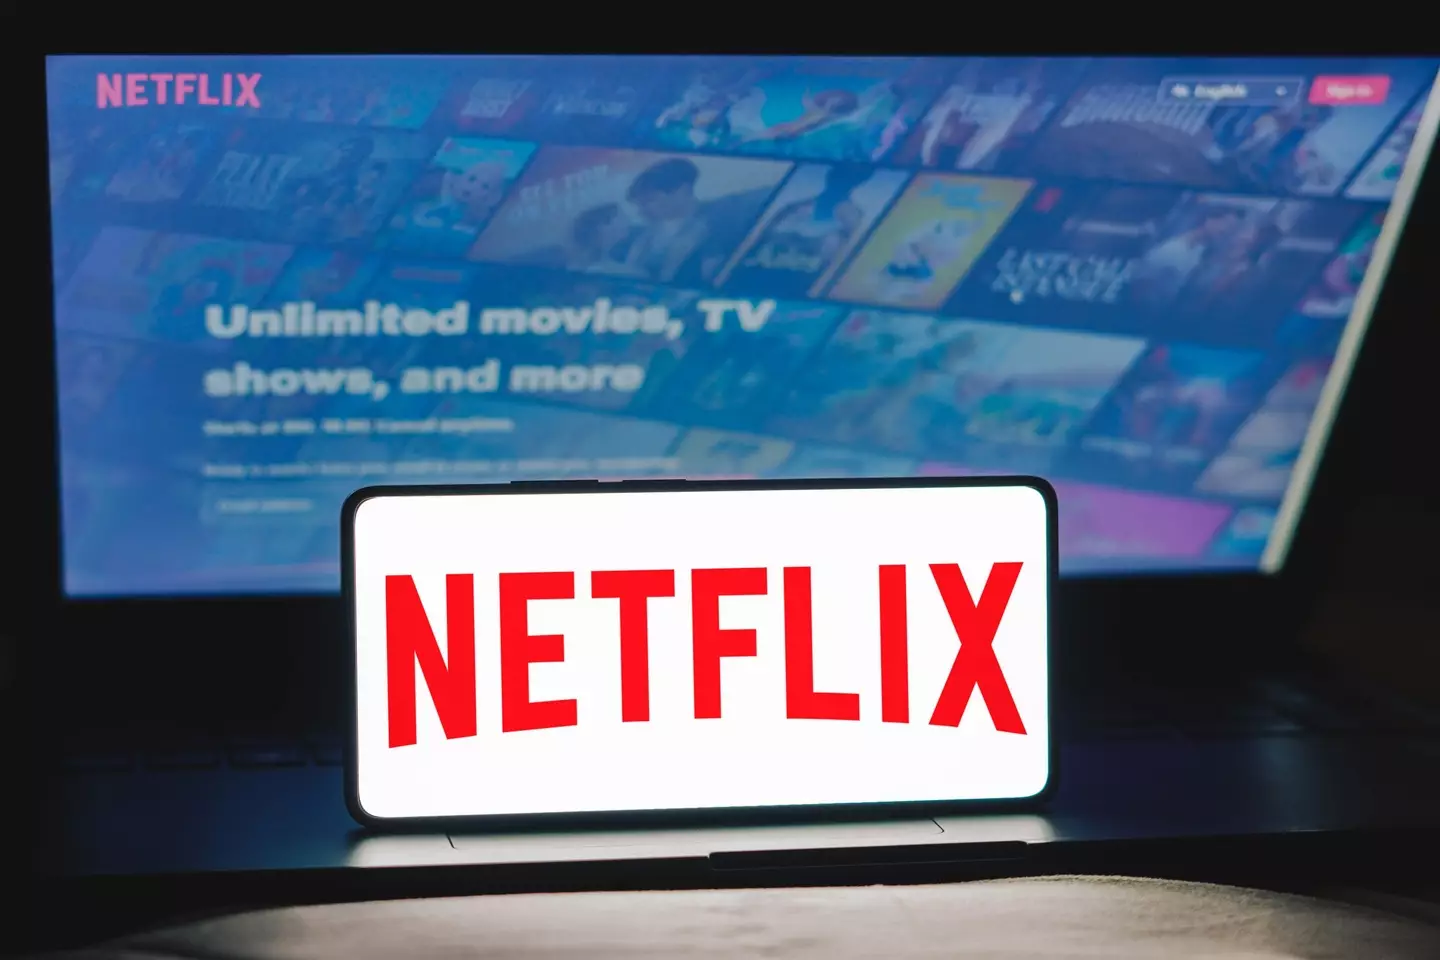 Some users weren't able to stream Netflix on Monday.